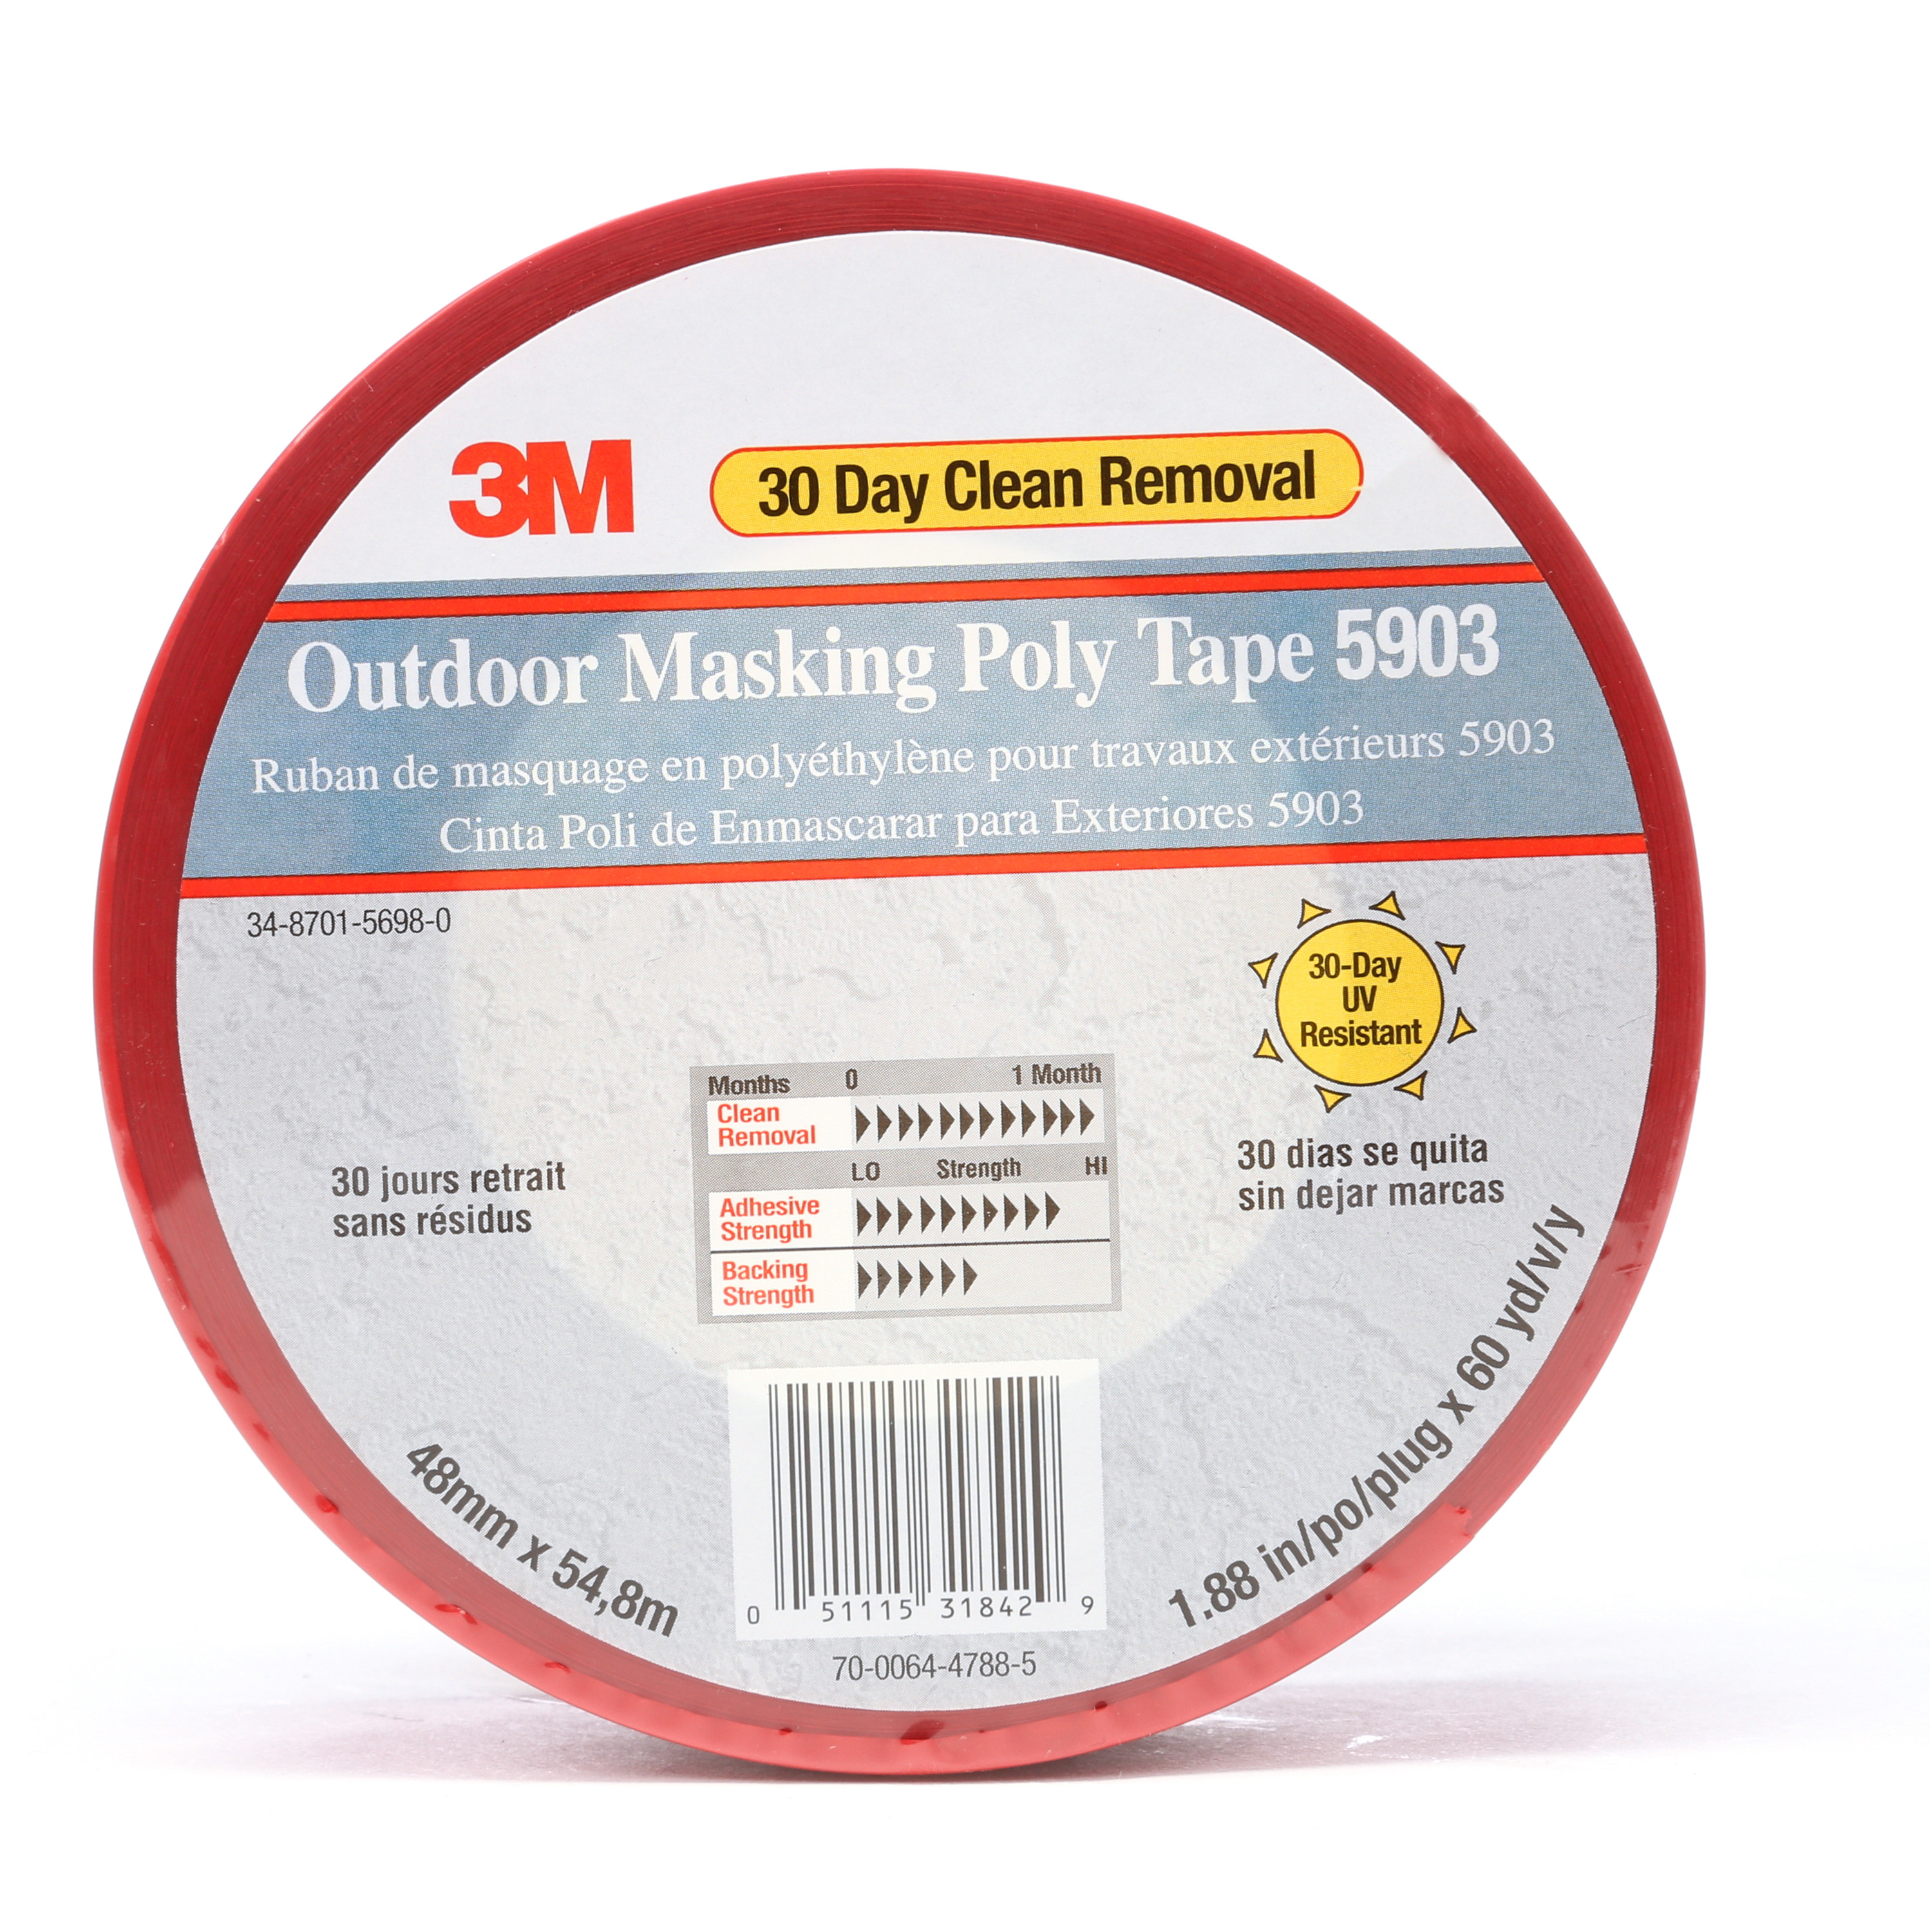 3M™ Outdoor Masking Poly Tape 5903, Red, 48 mm x 54.8 m, 7.5 mil, 24 per
case, Individually Wrapped Conveniently Packaged